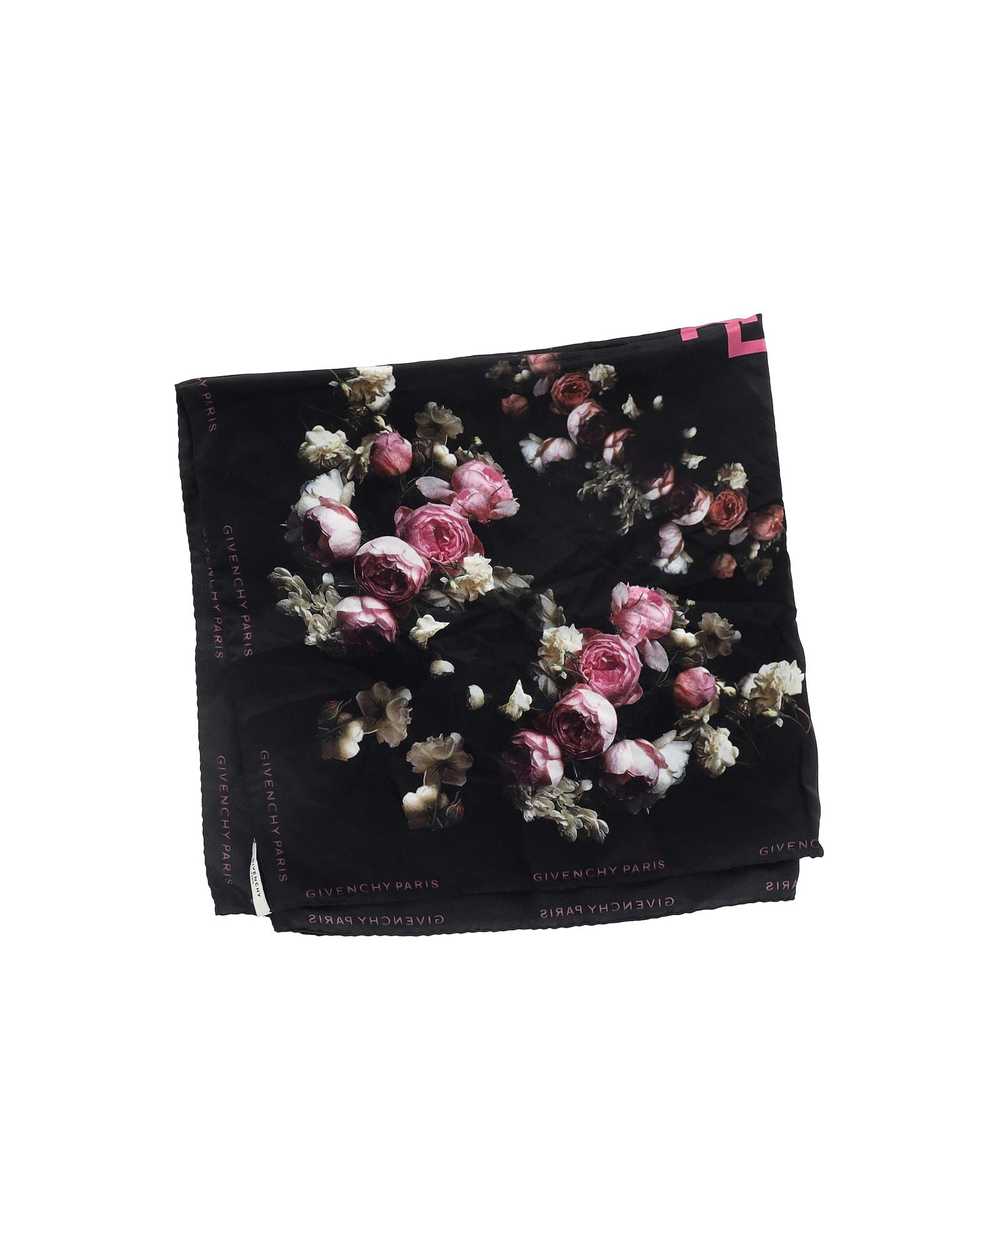 Product Details Givenchy Black Floral Silk Scarf - image 4